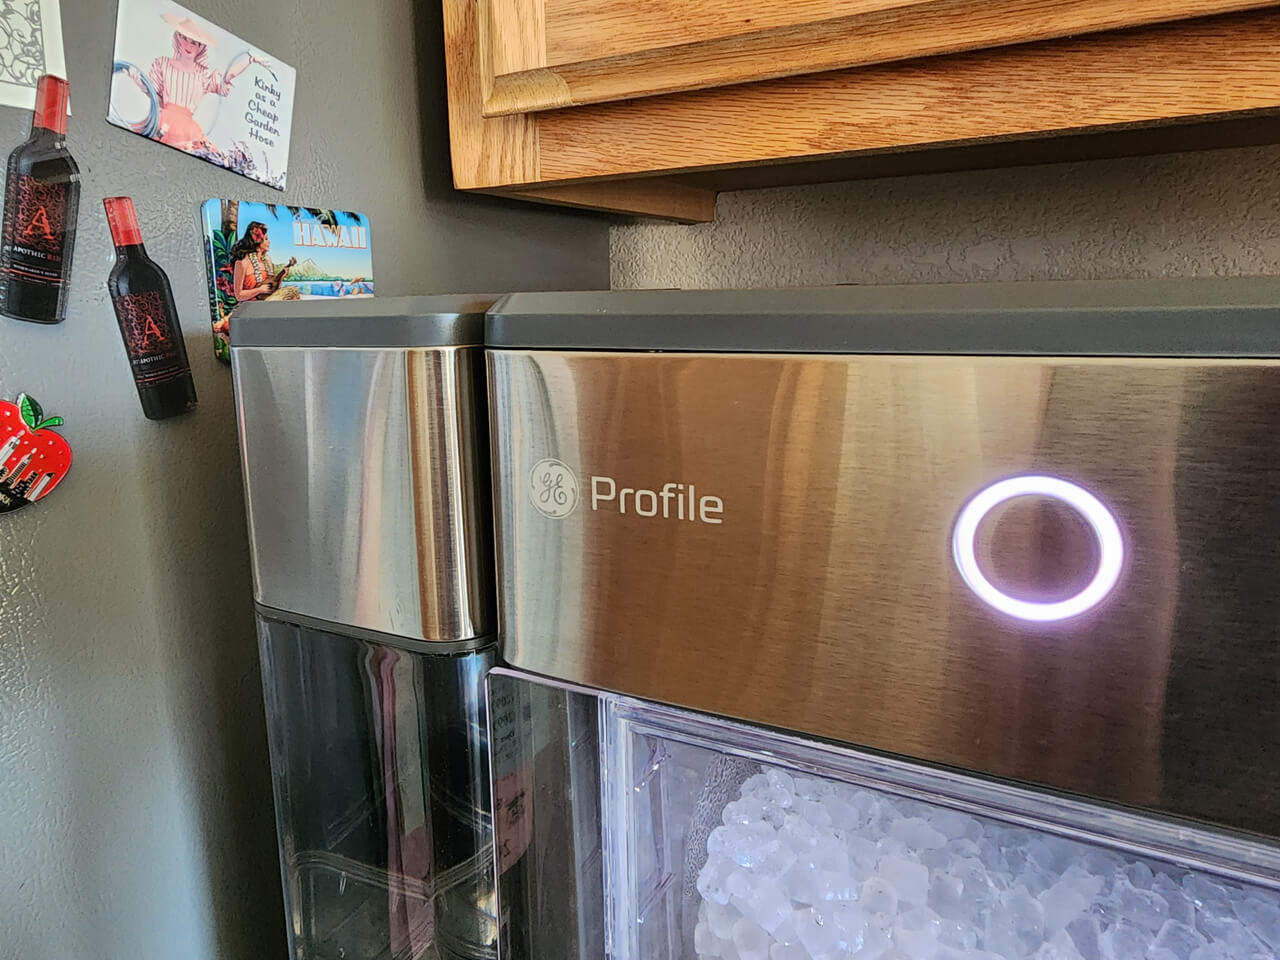 The GE Opal Ice Maker in a kitchen.